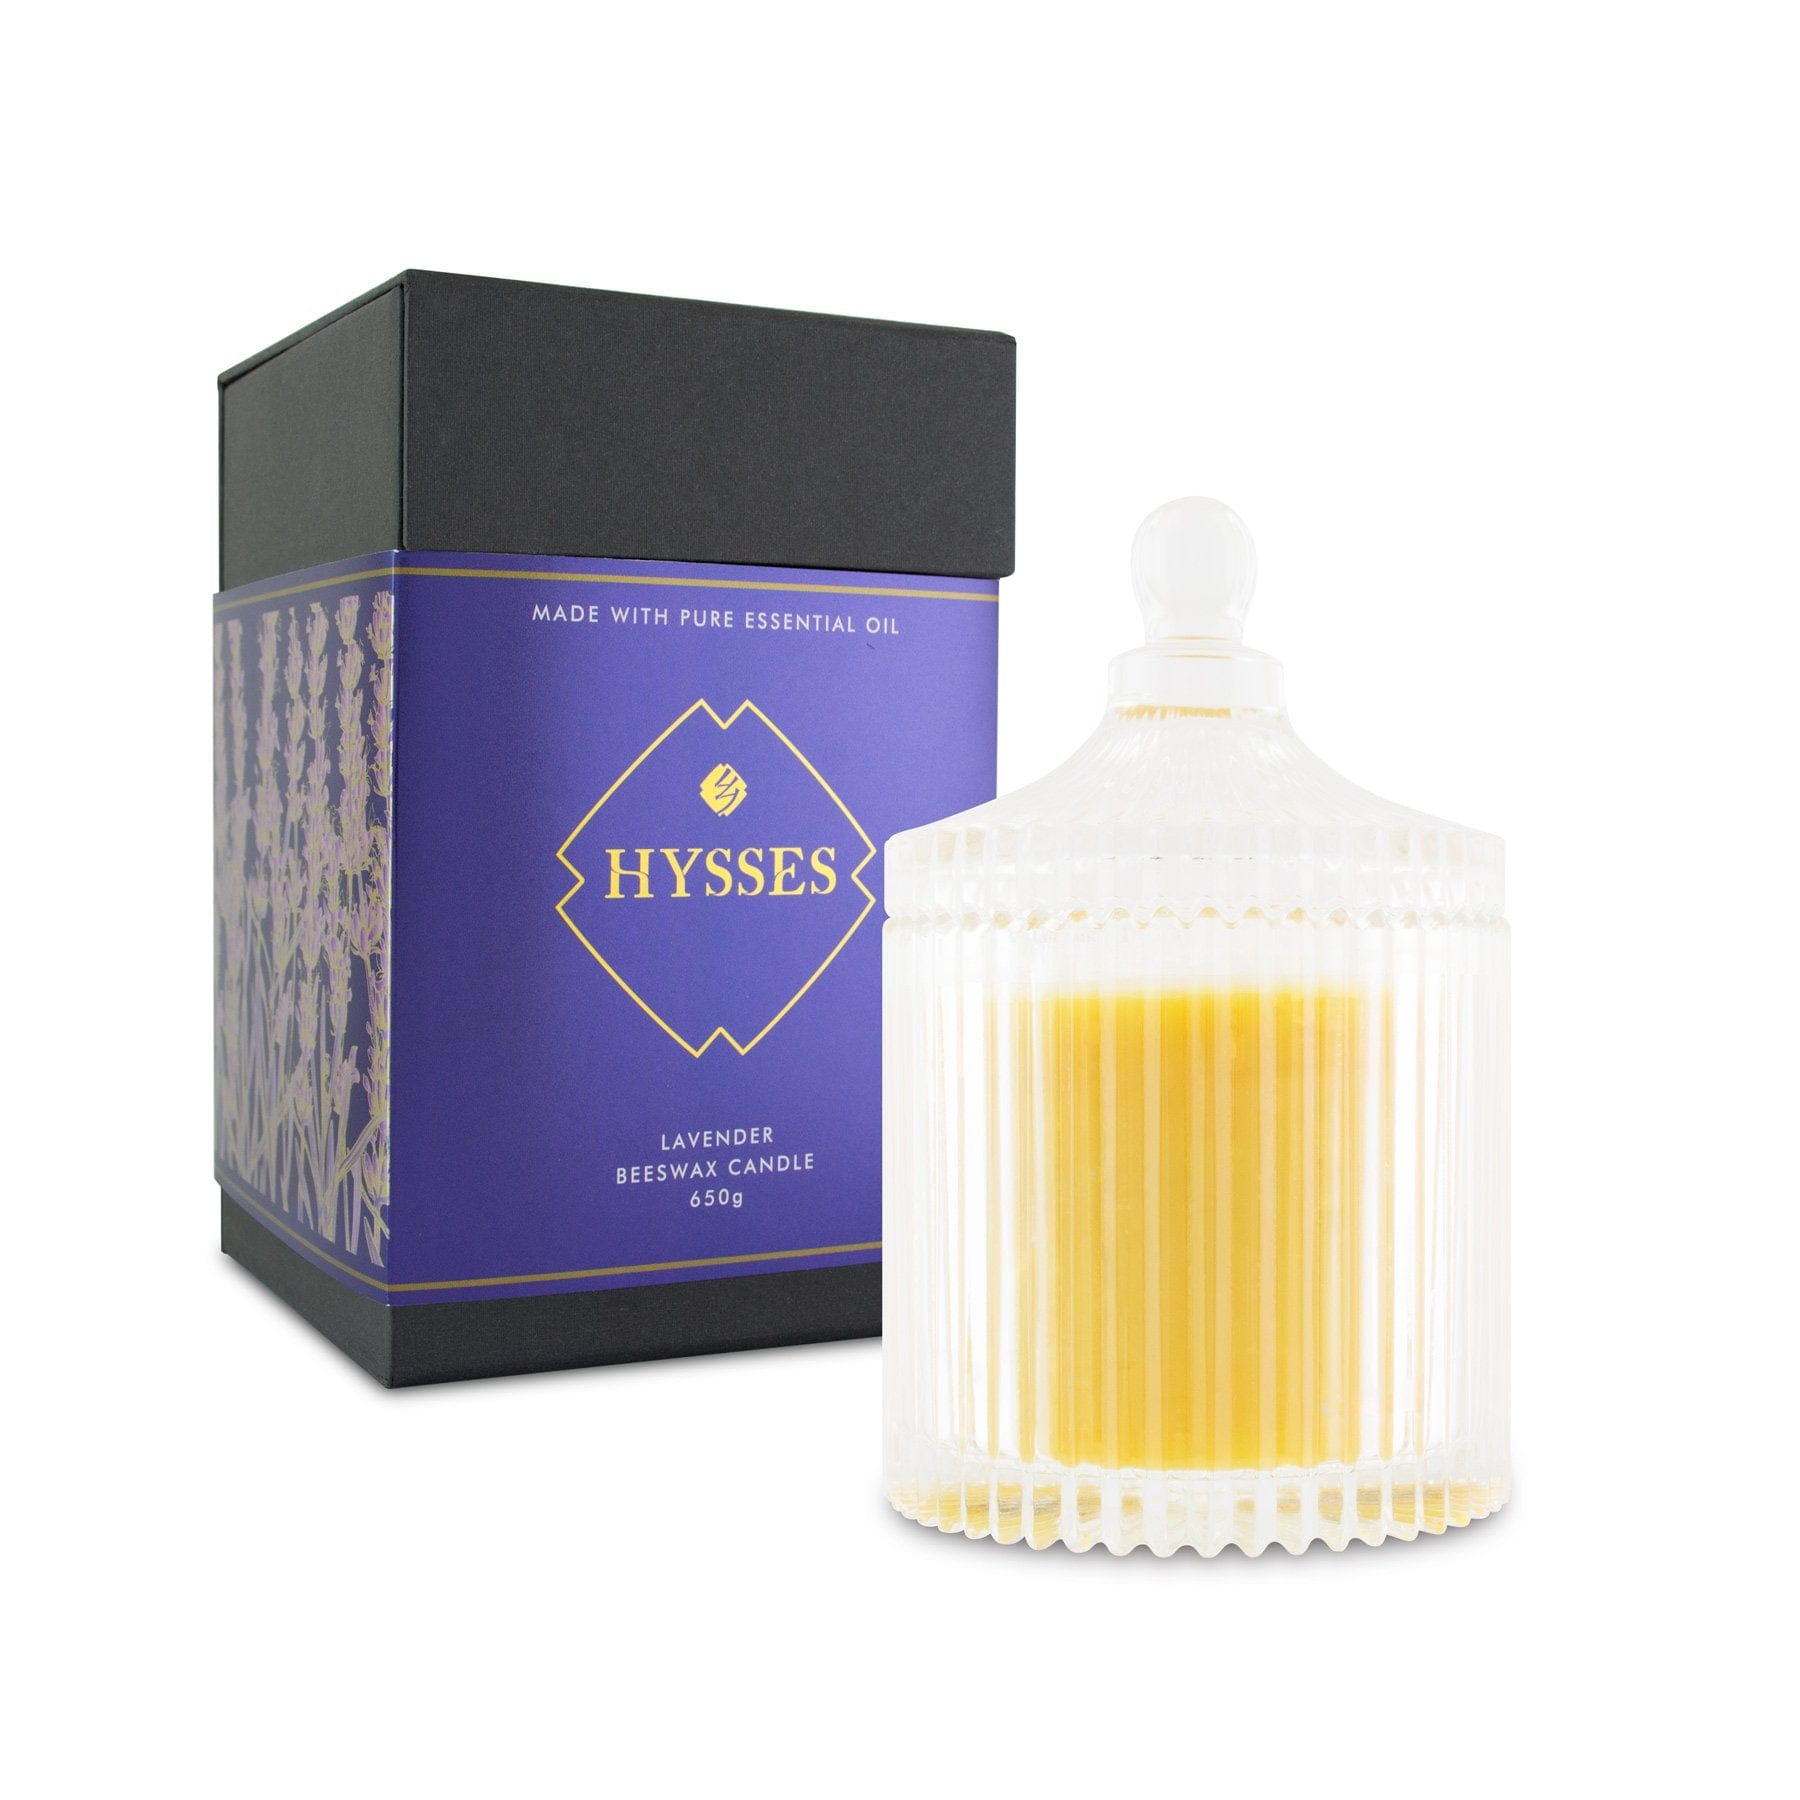 Hysses Home Scents 200g Beeswax Candle Lavender, 200g